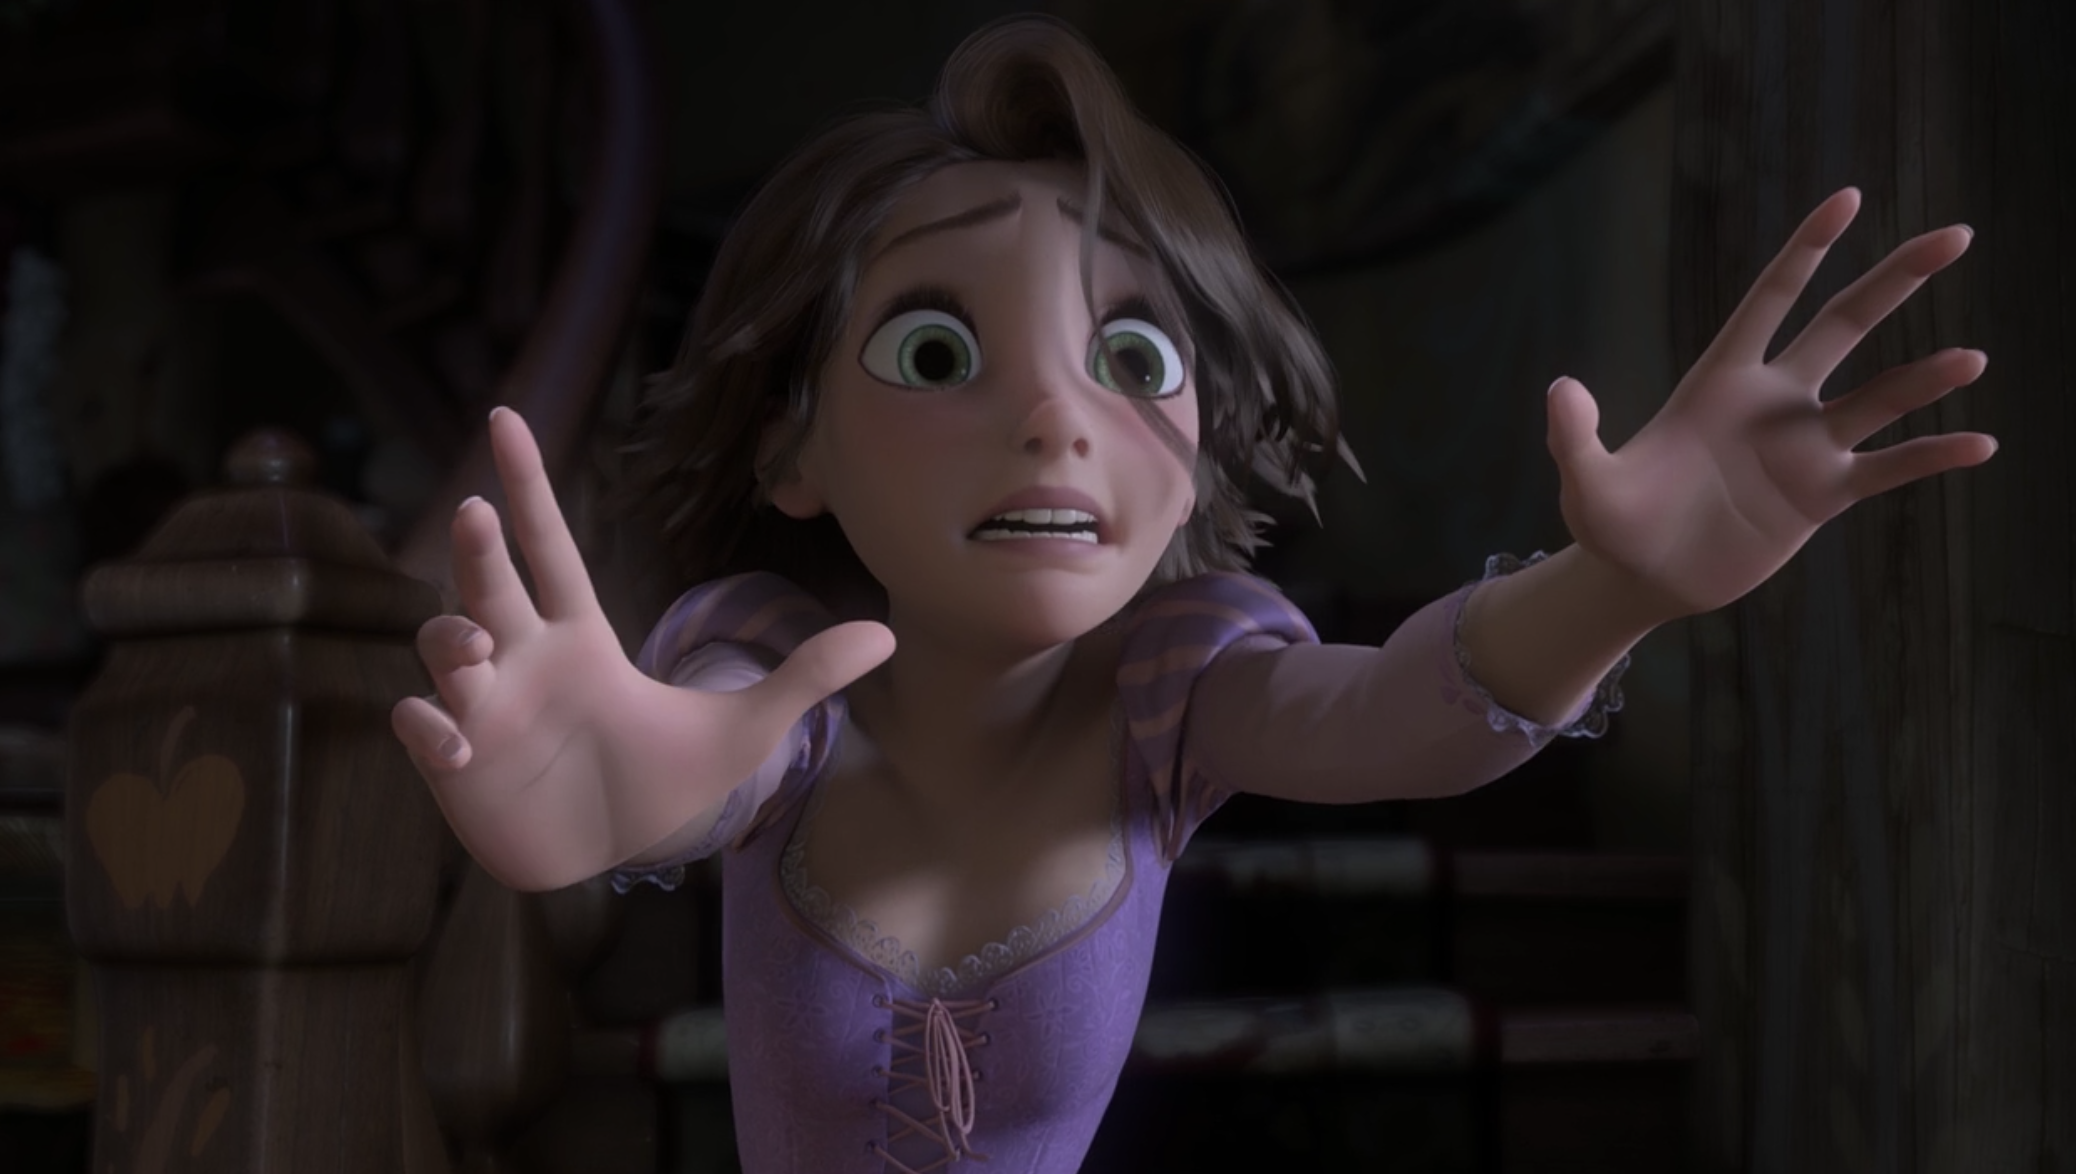 Rapunzel reaching out for Gothel